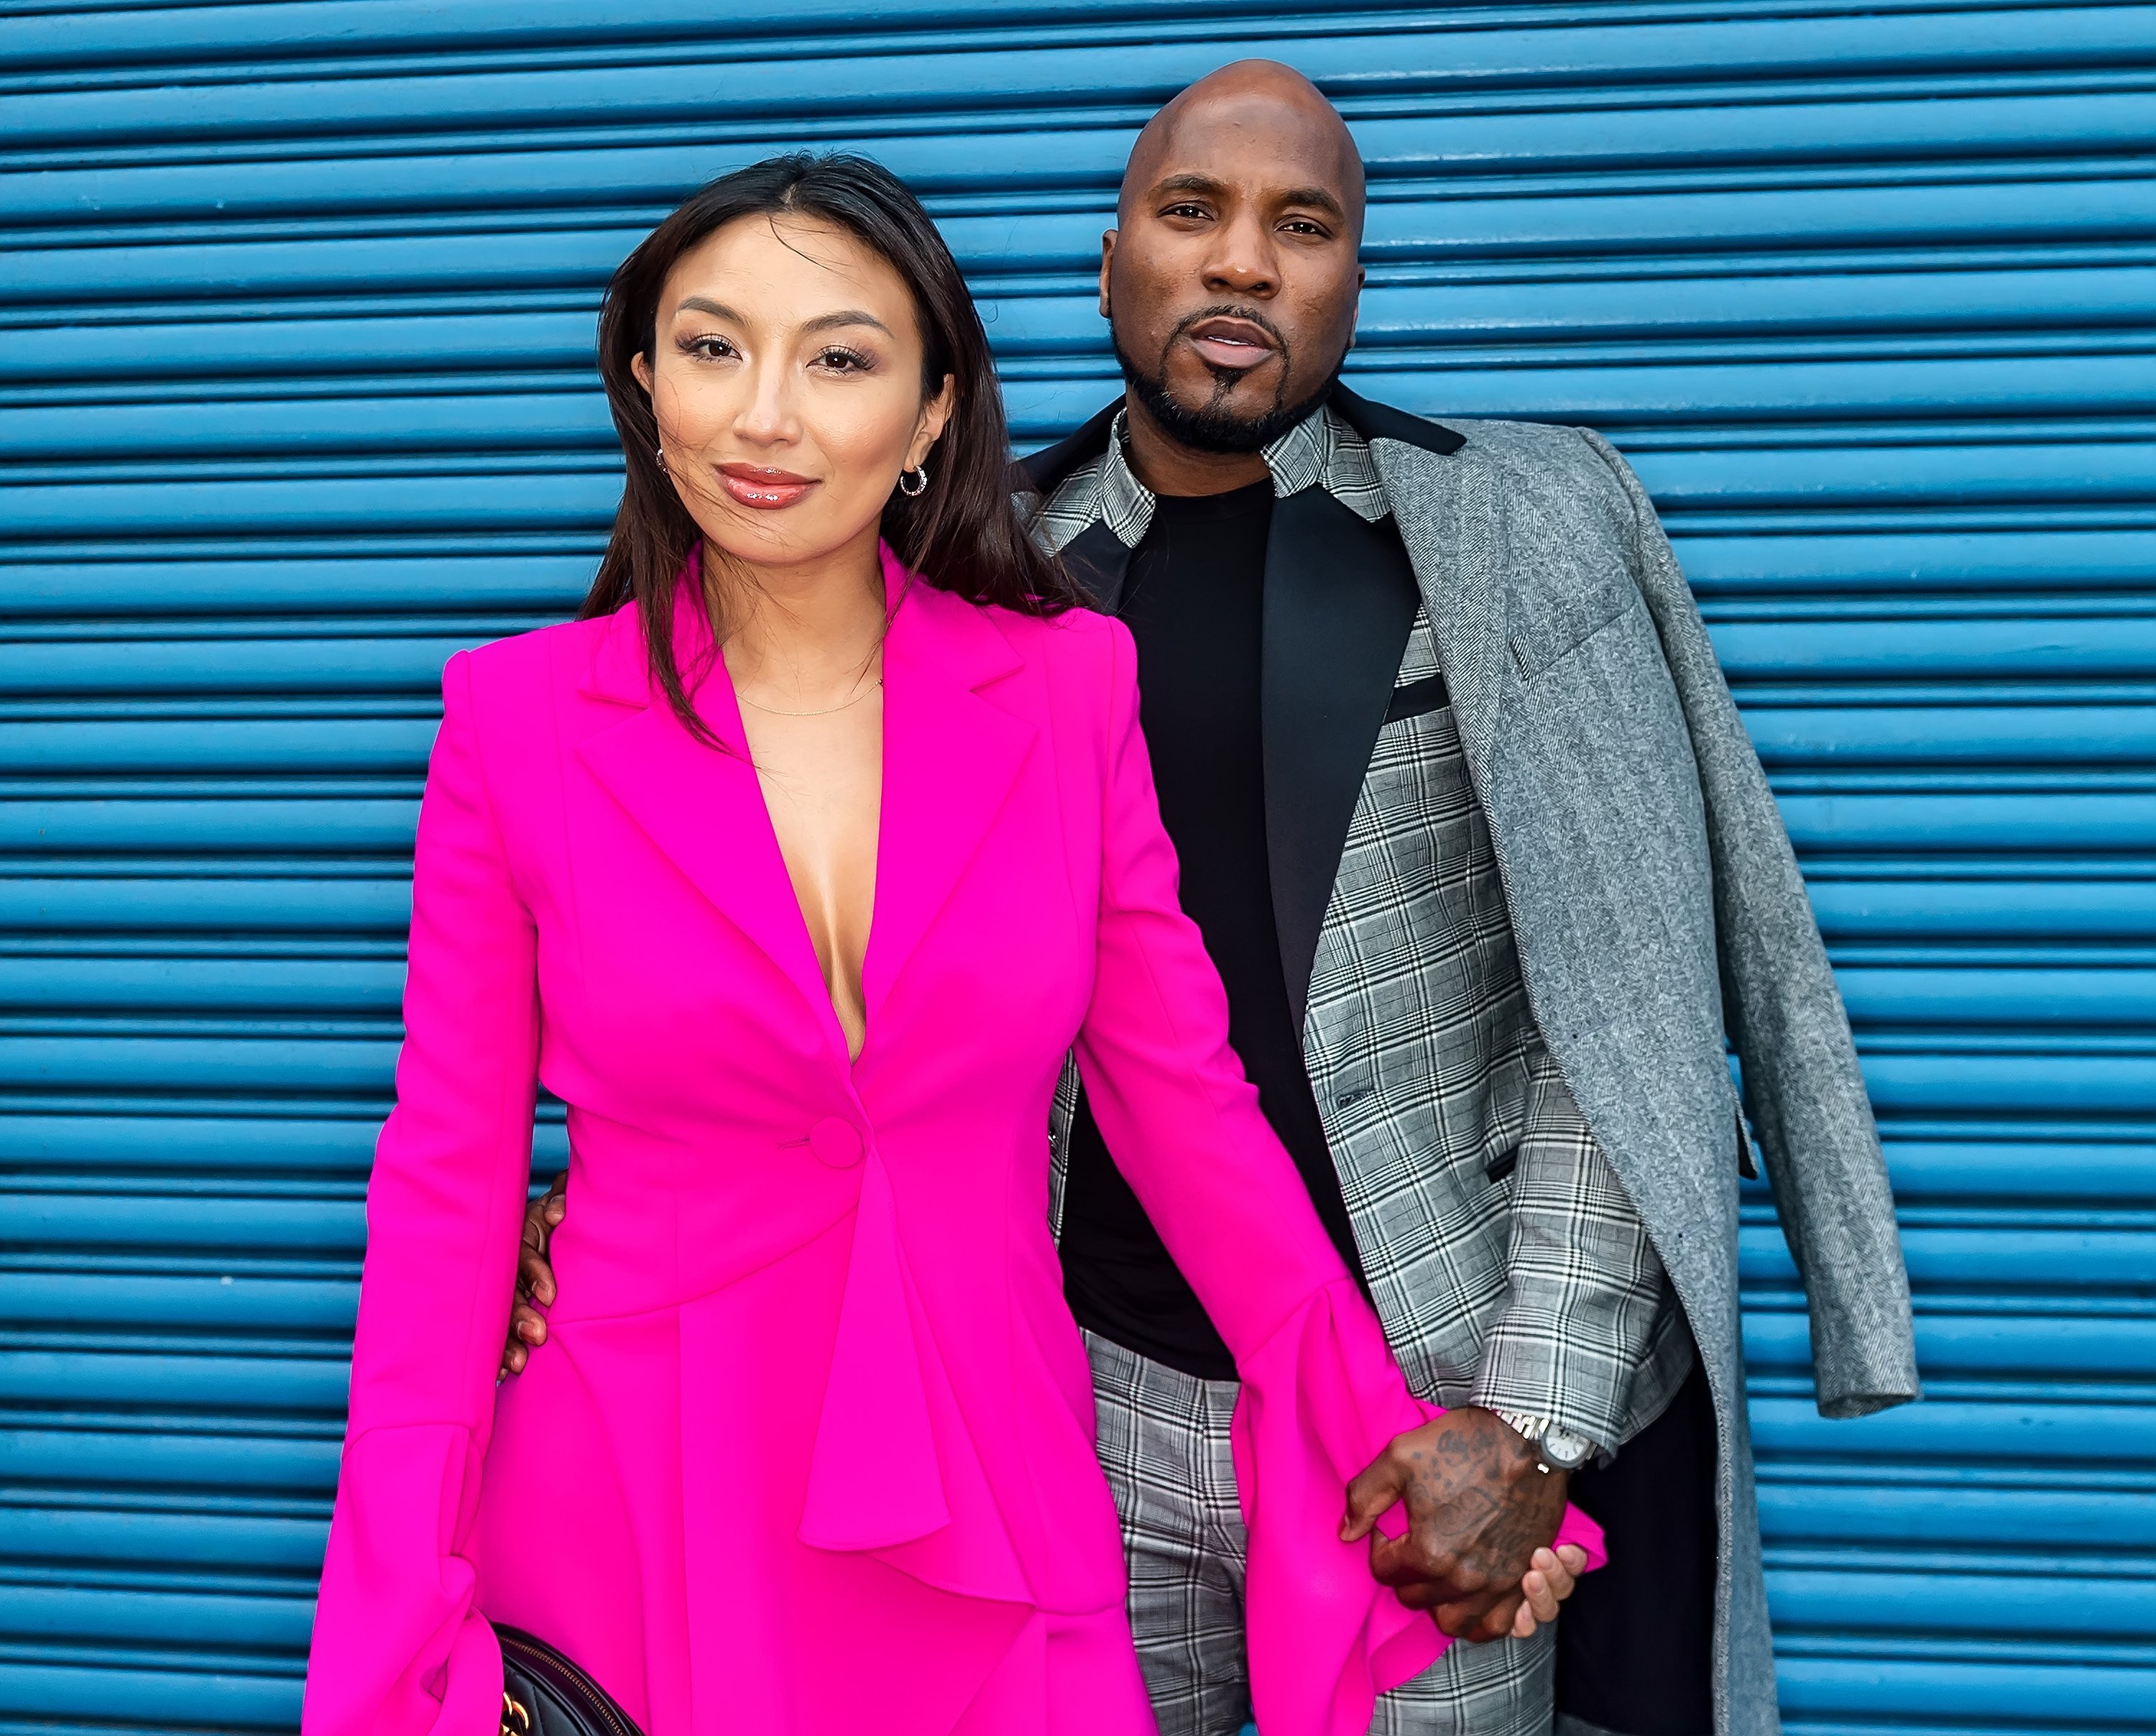 Jeannie Mai and Young Jeezy on February 07, 2020 in New York City | Photo: Getty Images